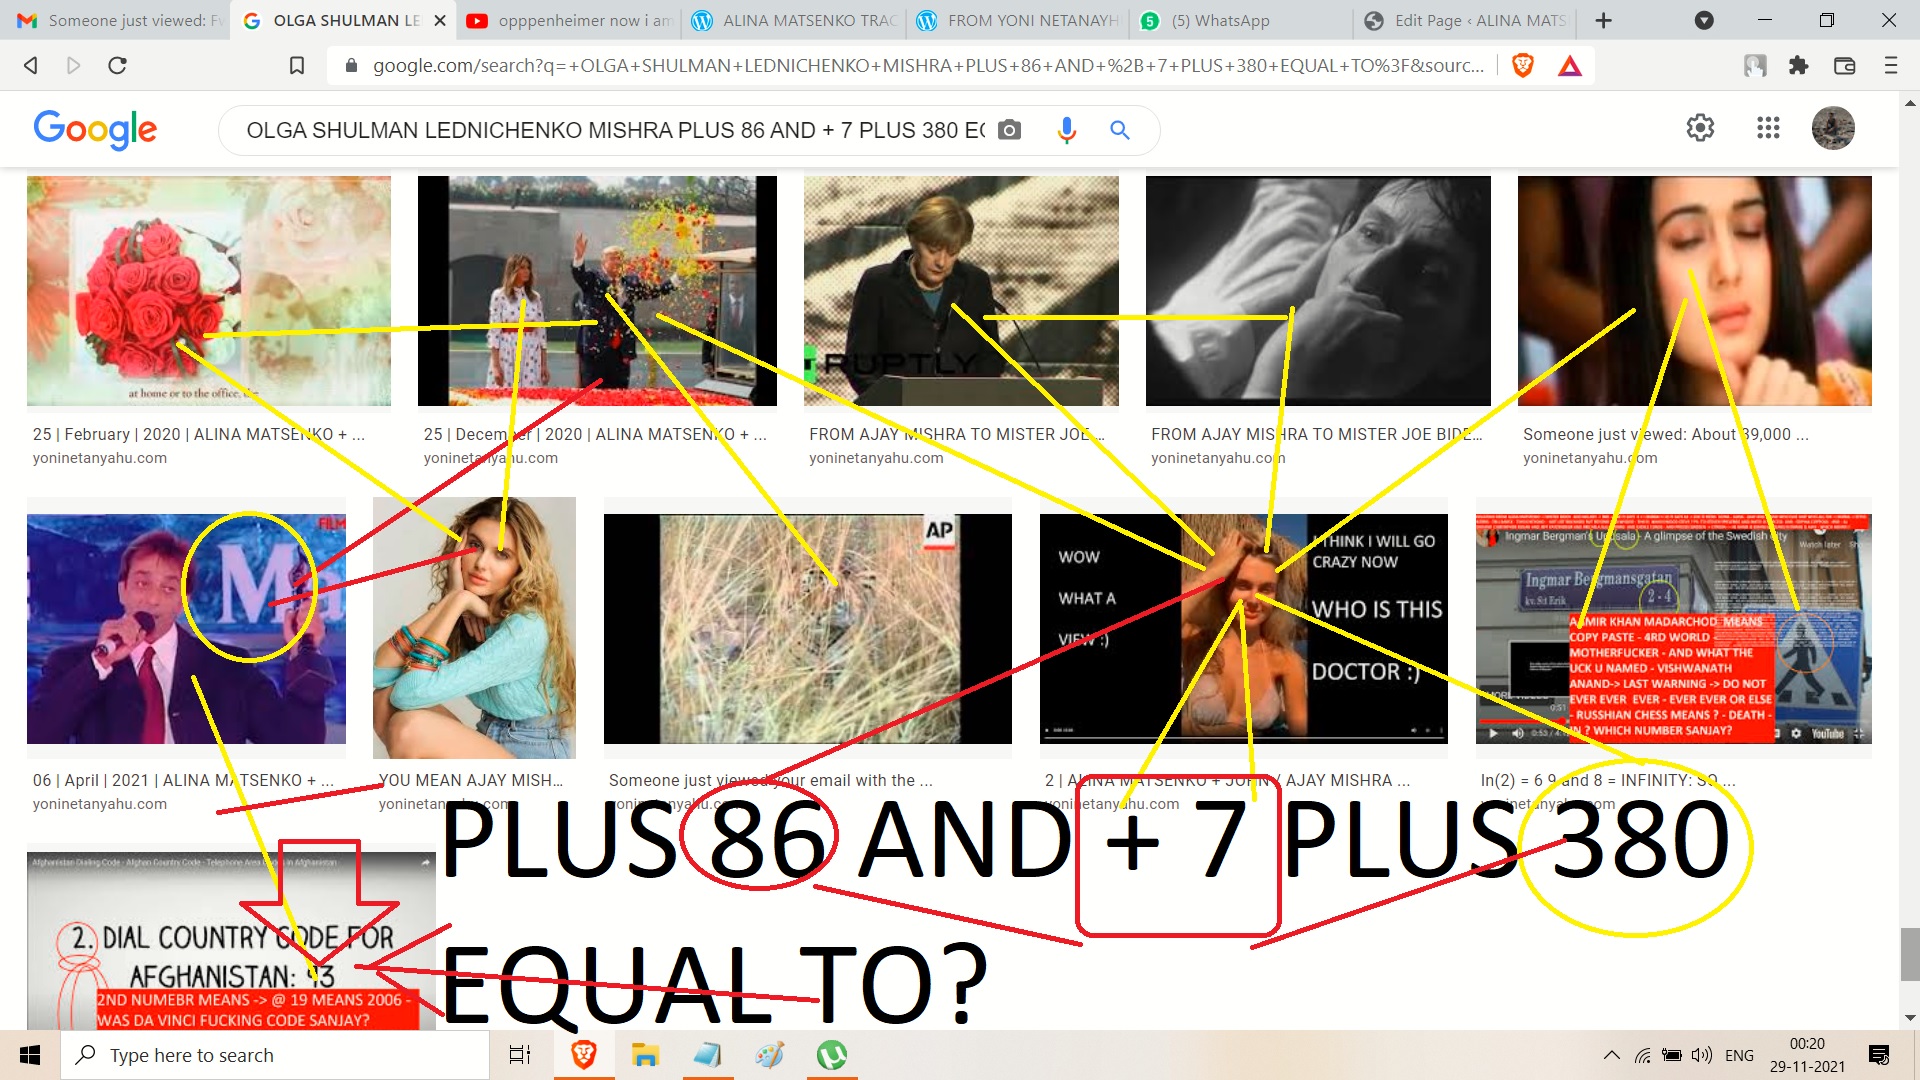 MISHRA PLUS 86 AND + 7 PLUS 380 EQUAL TO 643361467 and olga was maoed to 324368521 which was mapepd to ajay ishar menas 643361467 leave olga alone -